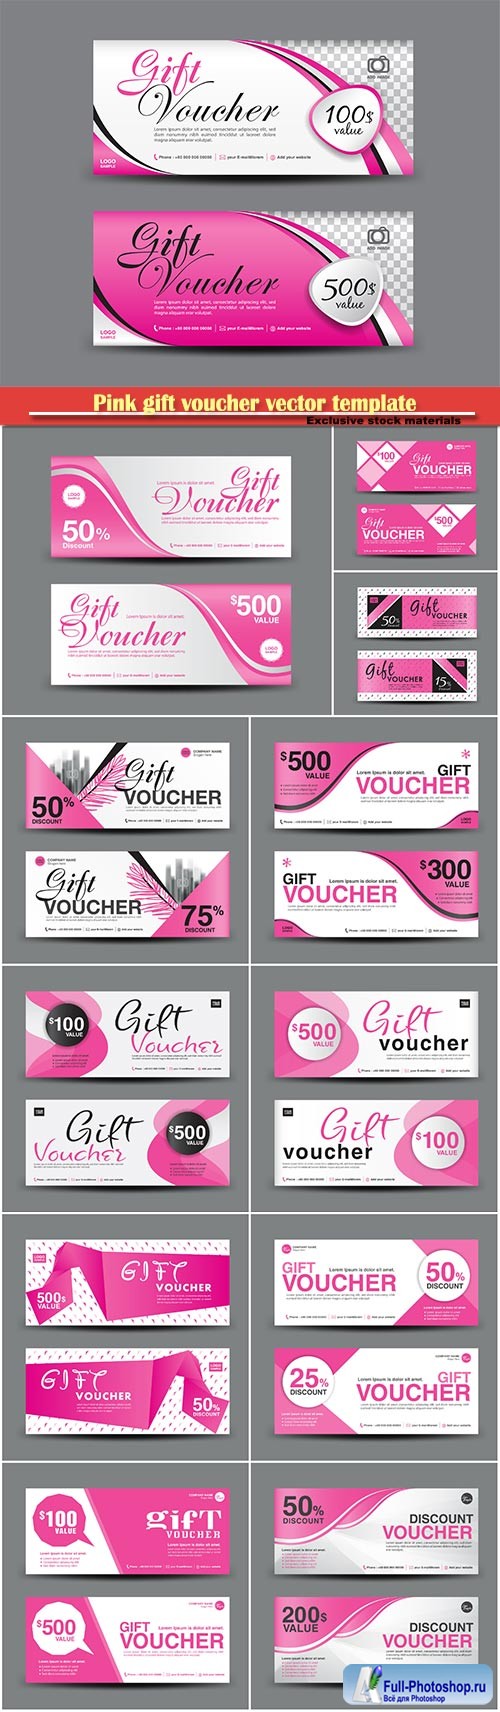 Pink gift voucher vector template, coupon design, certificate, Valentine's Day sale banner